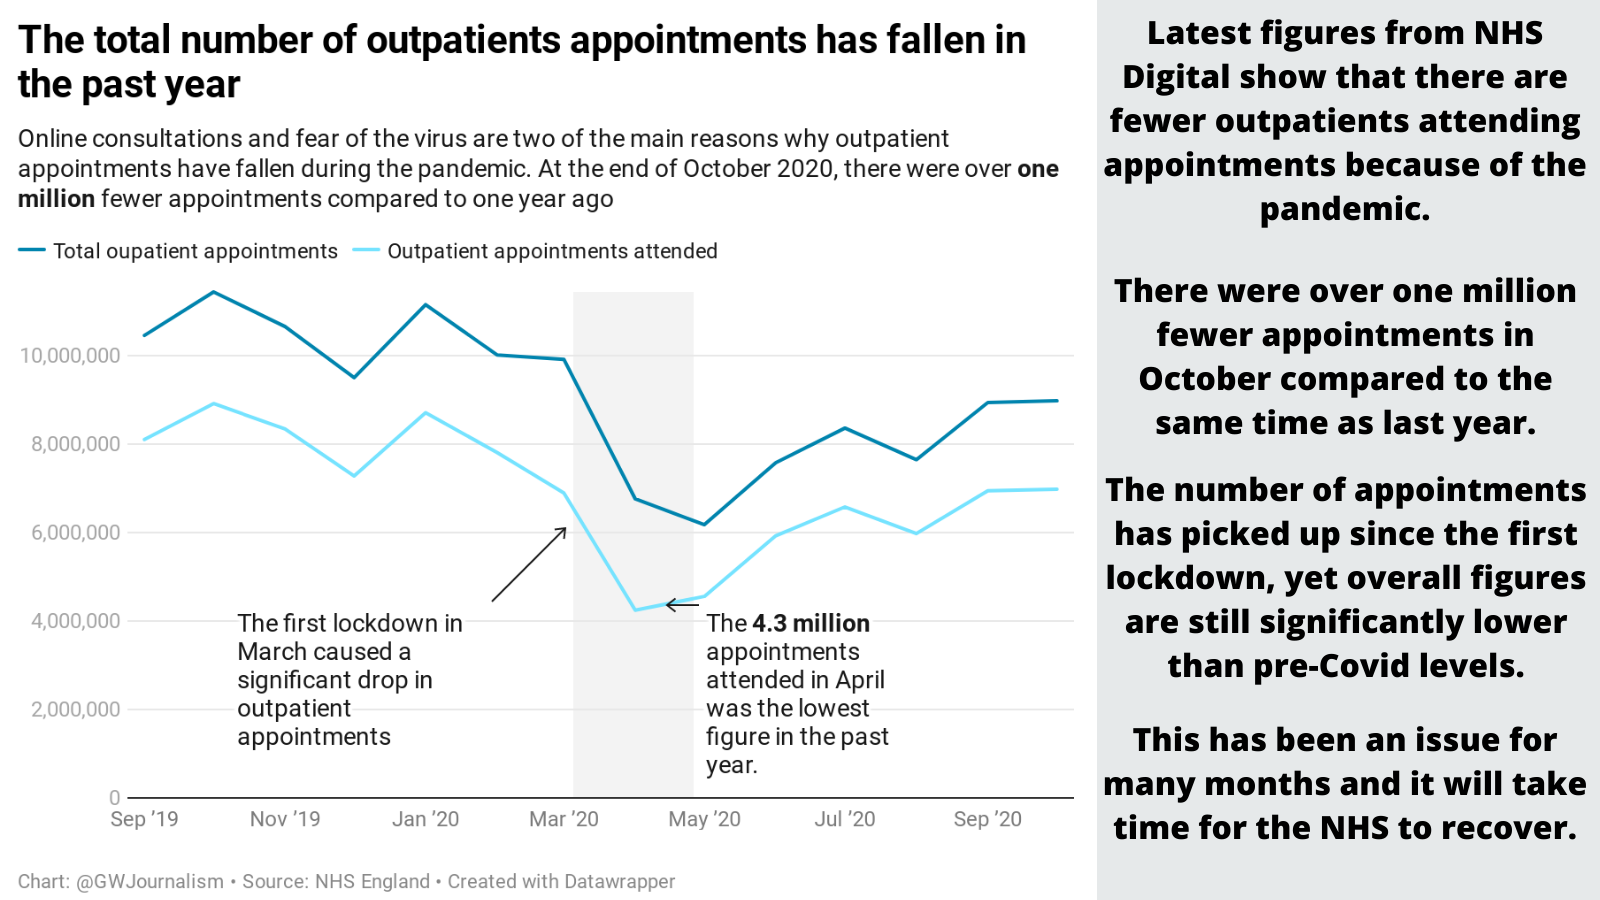 Falling outpatient appointments